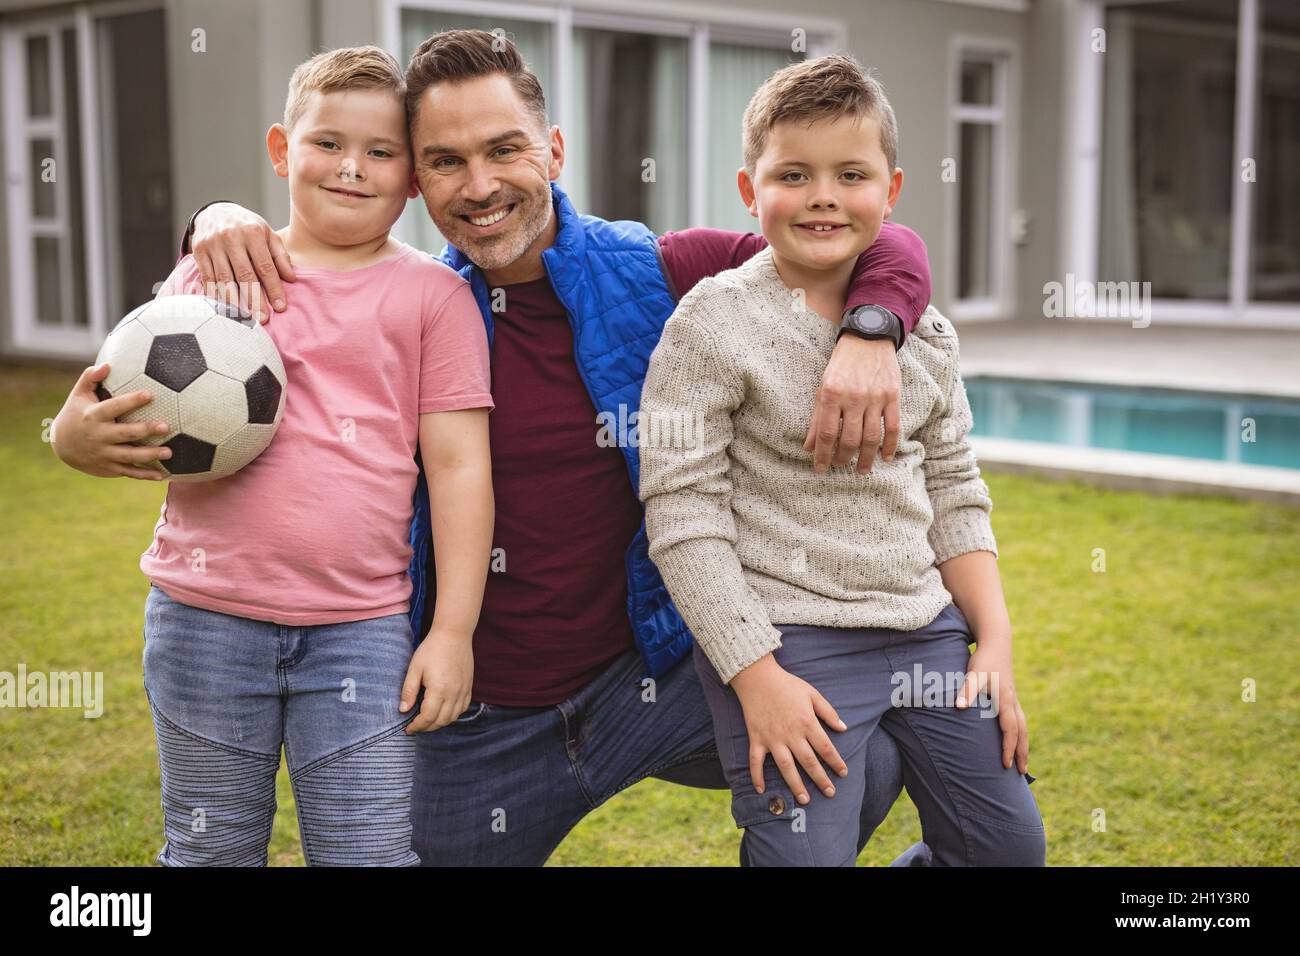 Portrait of caucasian father and two sons smiling while holding football in the garden Stock Photo